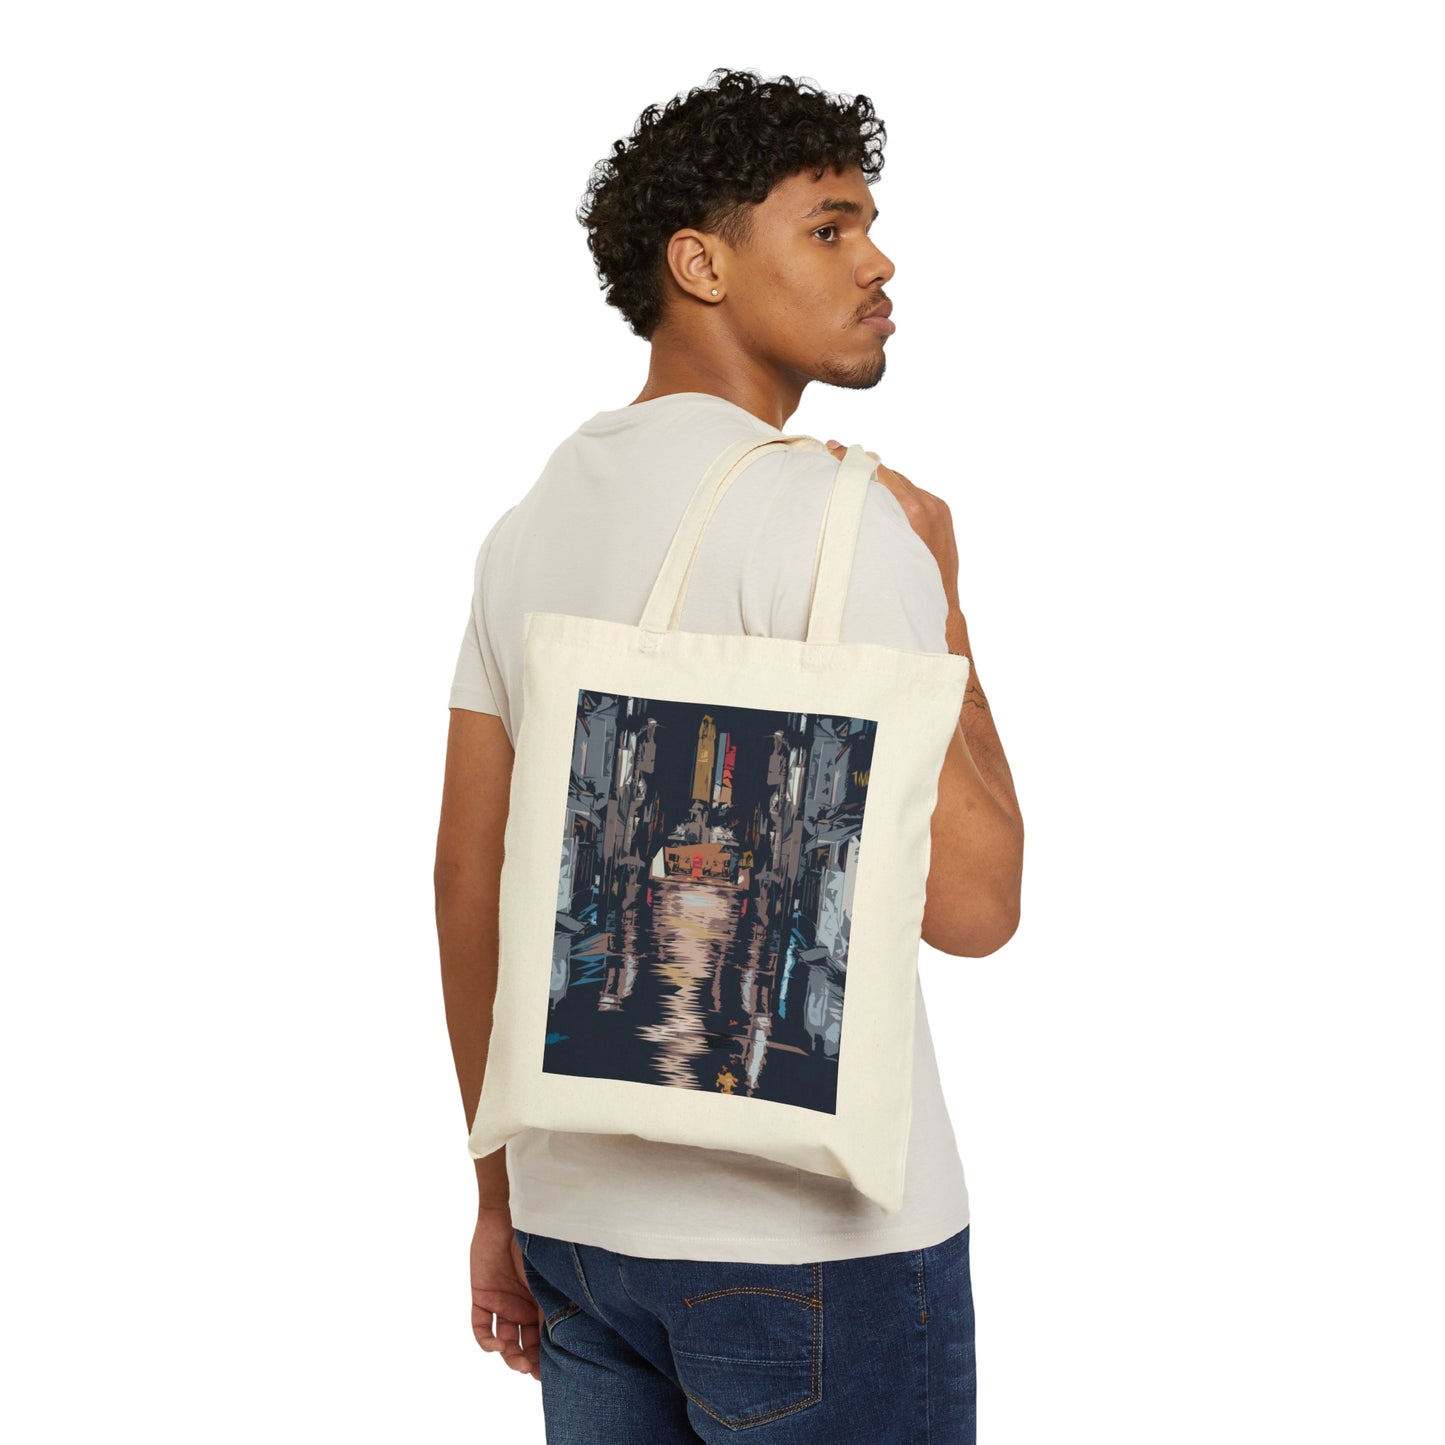 City Night Modern Abstract Art Canvas Shopping Cotton Tote Bag